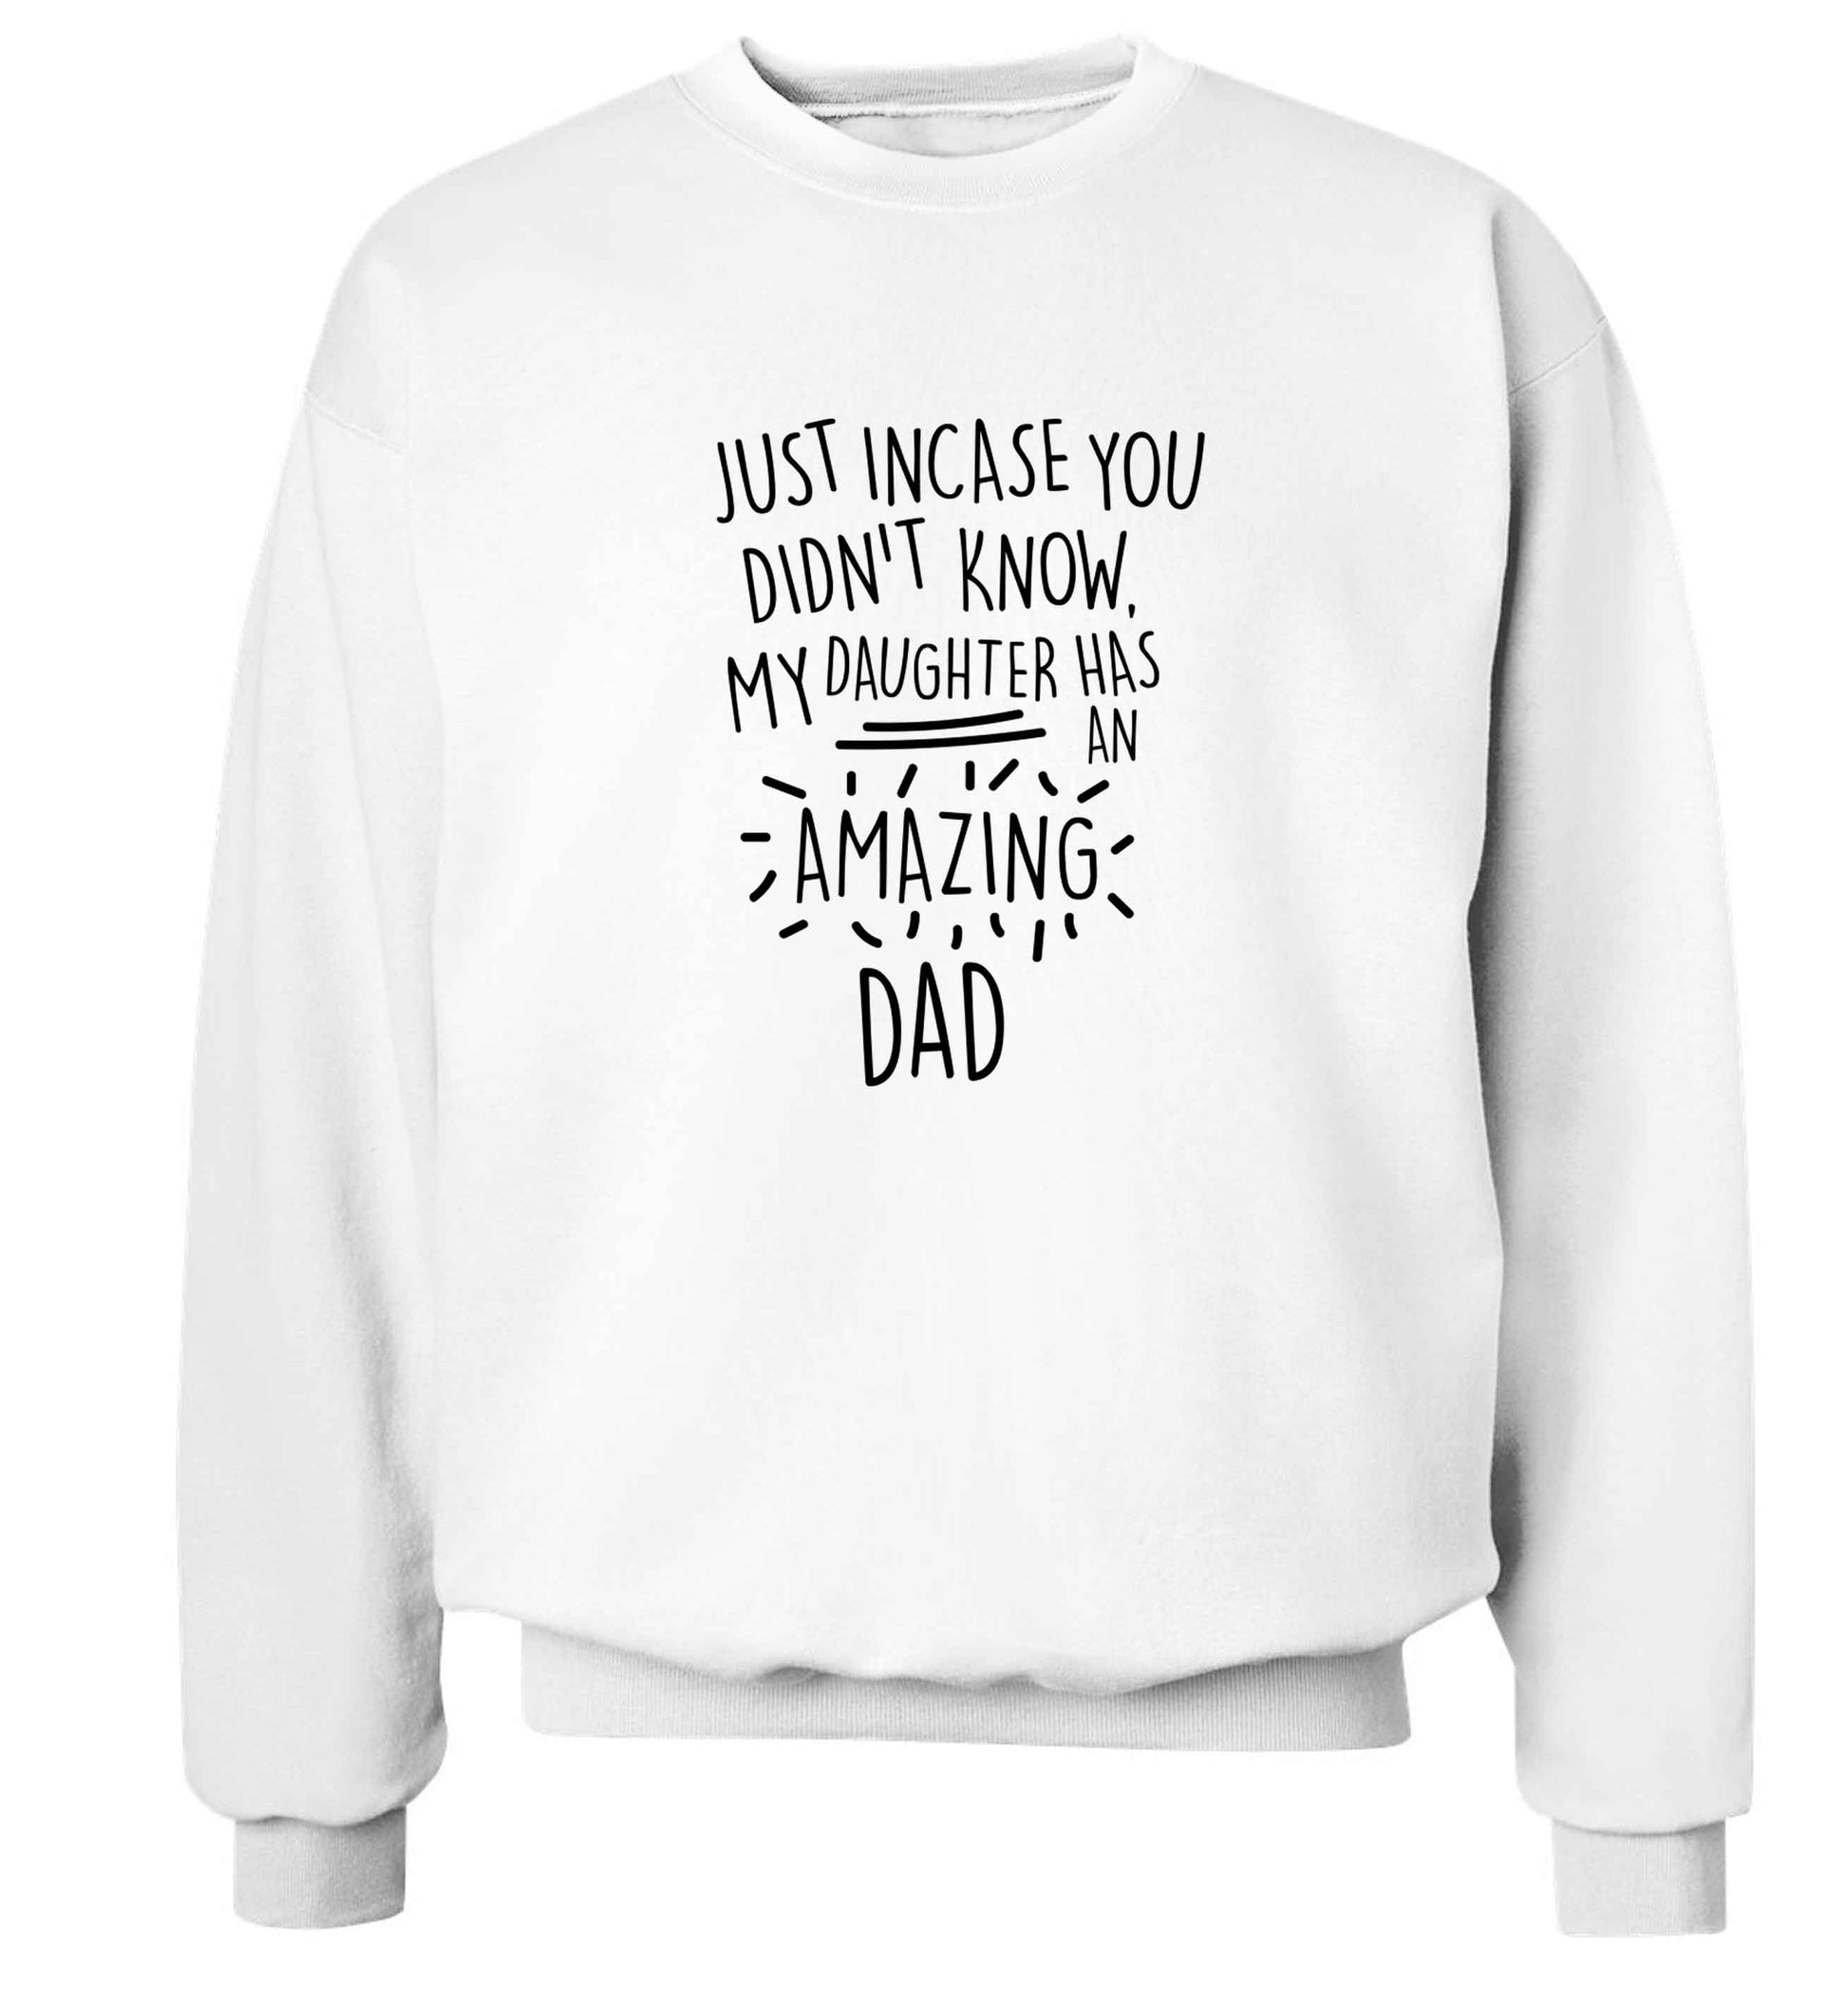 Just incase you didn't know my daughter has an amazing dad adult's unisex white sweater 2XL